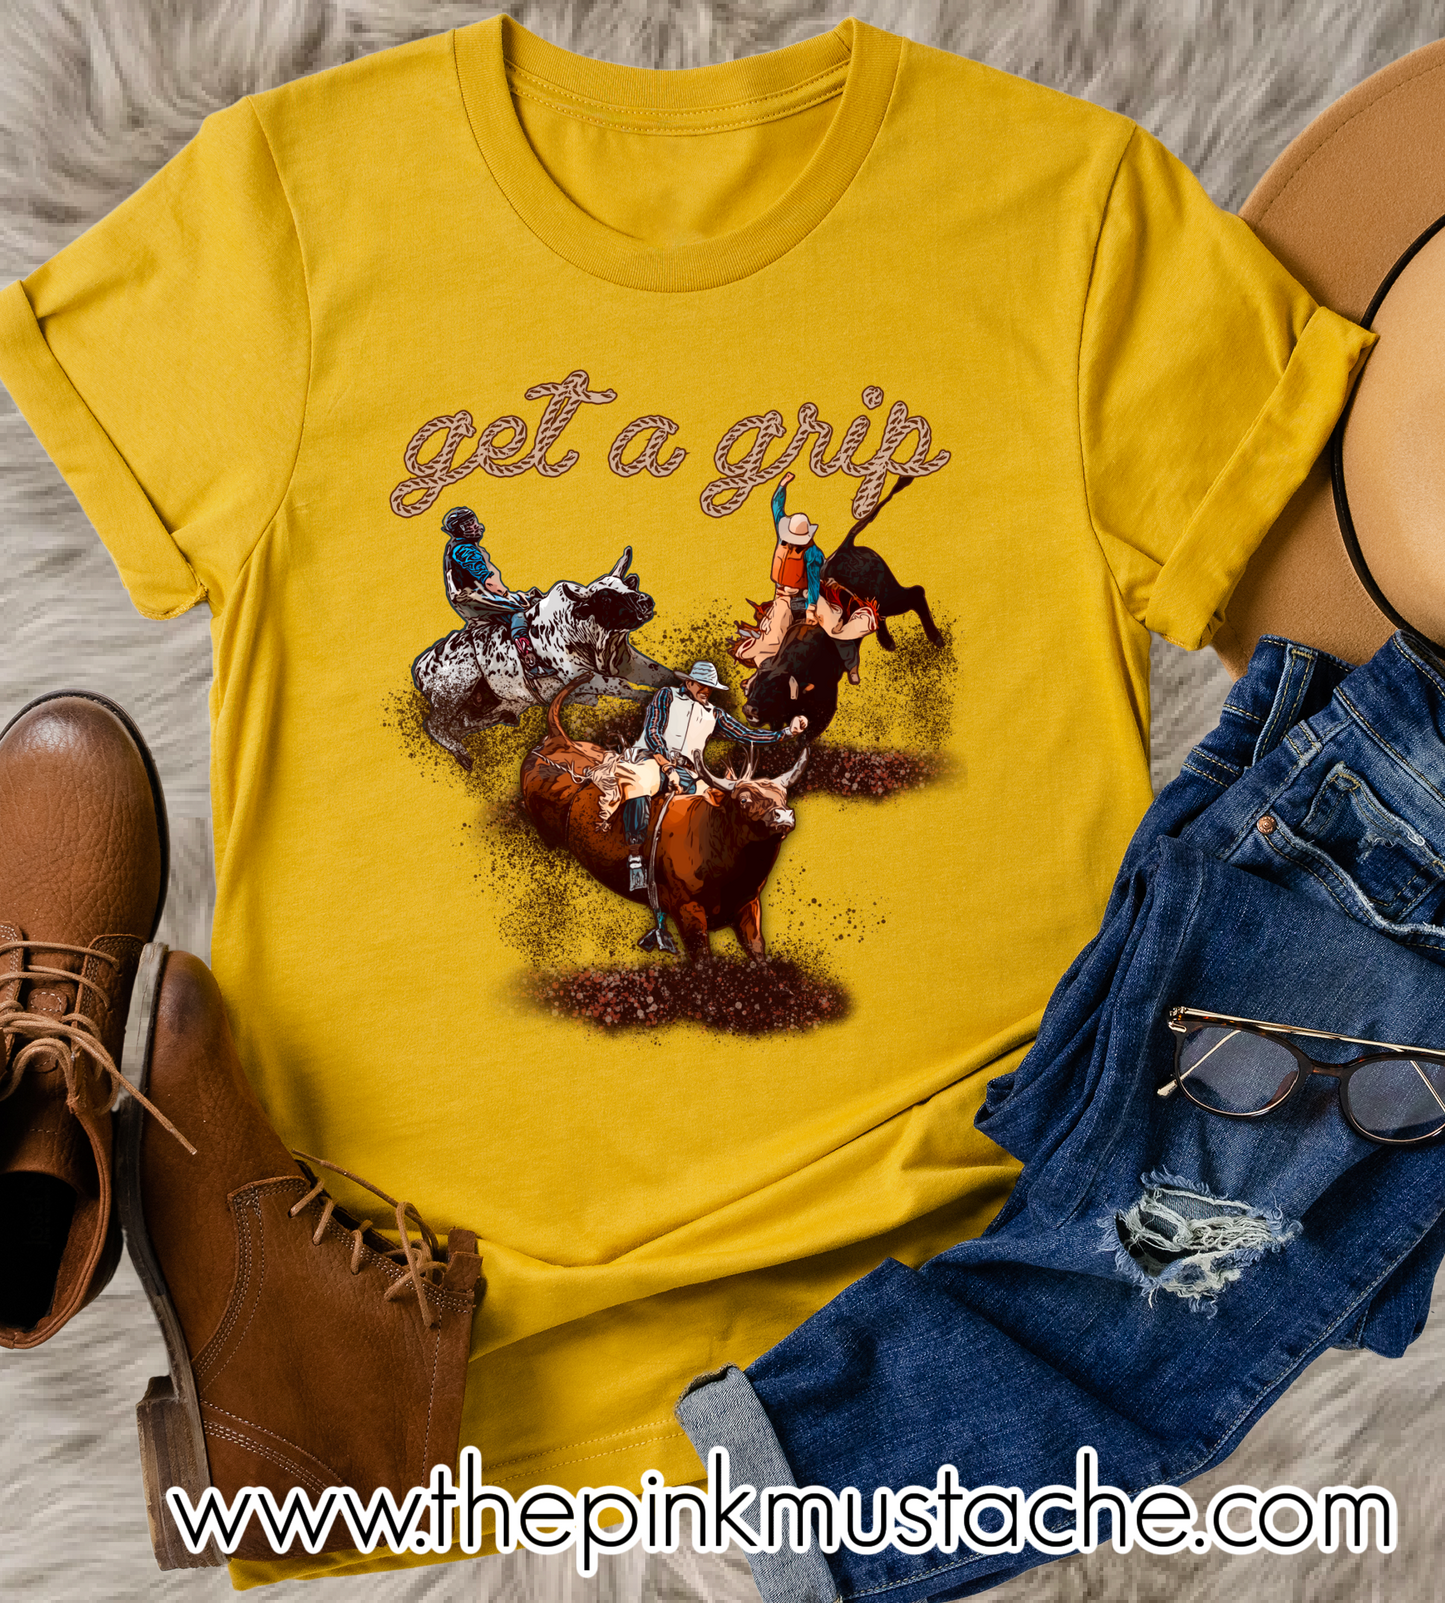 Soft Style Get A Grip Rodeo Western Style Shirt/ Toddler, Youth, and Adult Sizes - Rodeo Bull Riding Western Vibes Tee